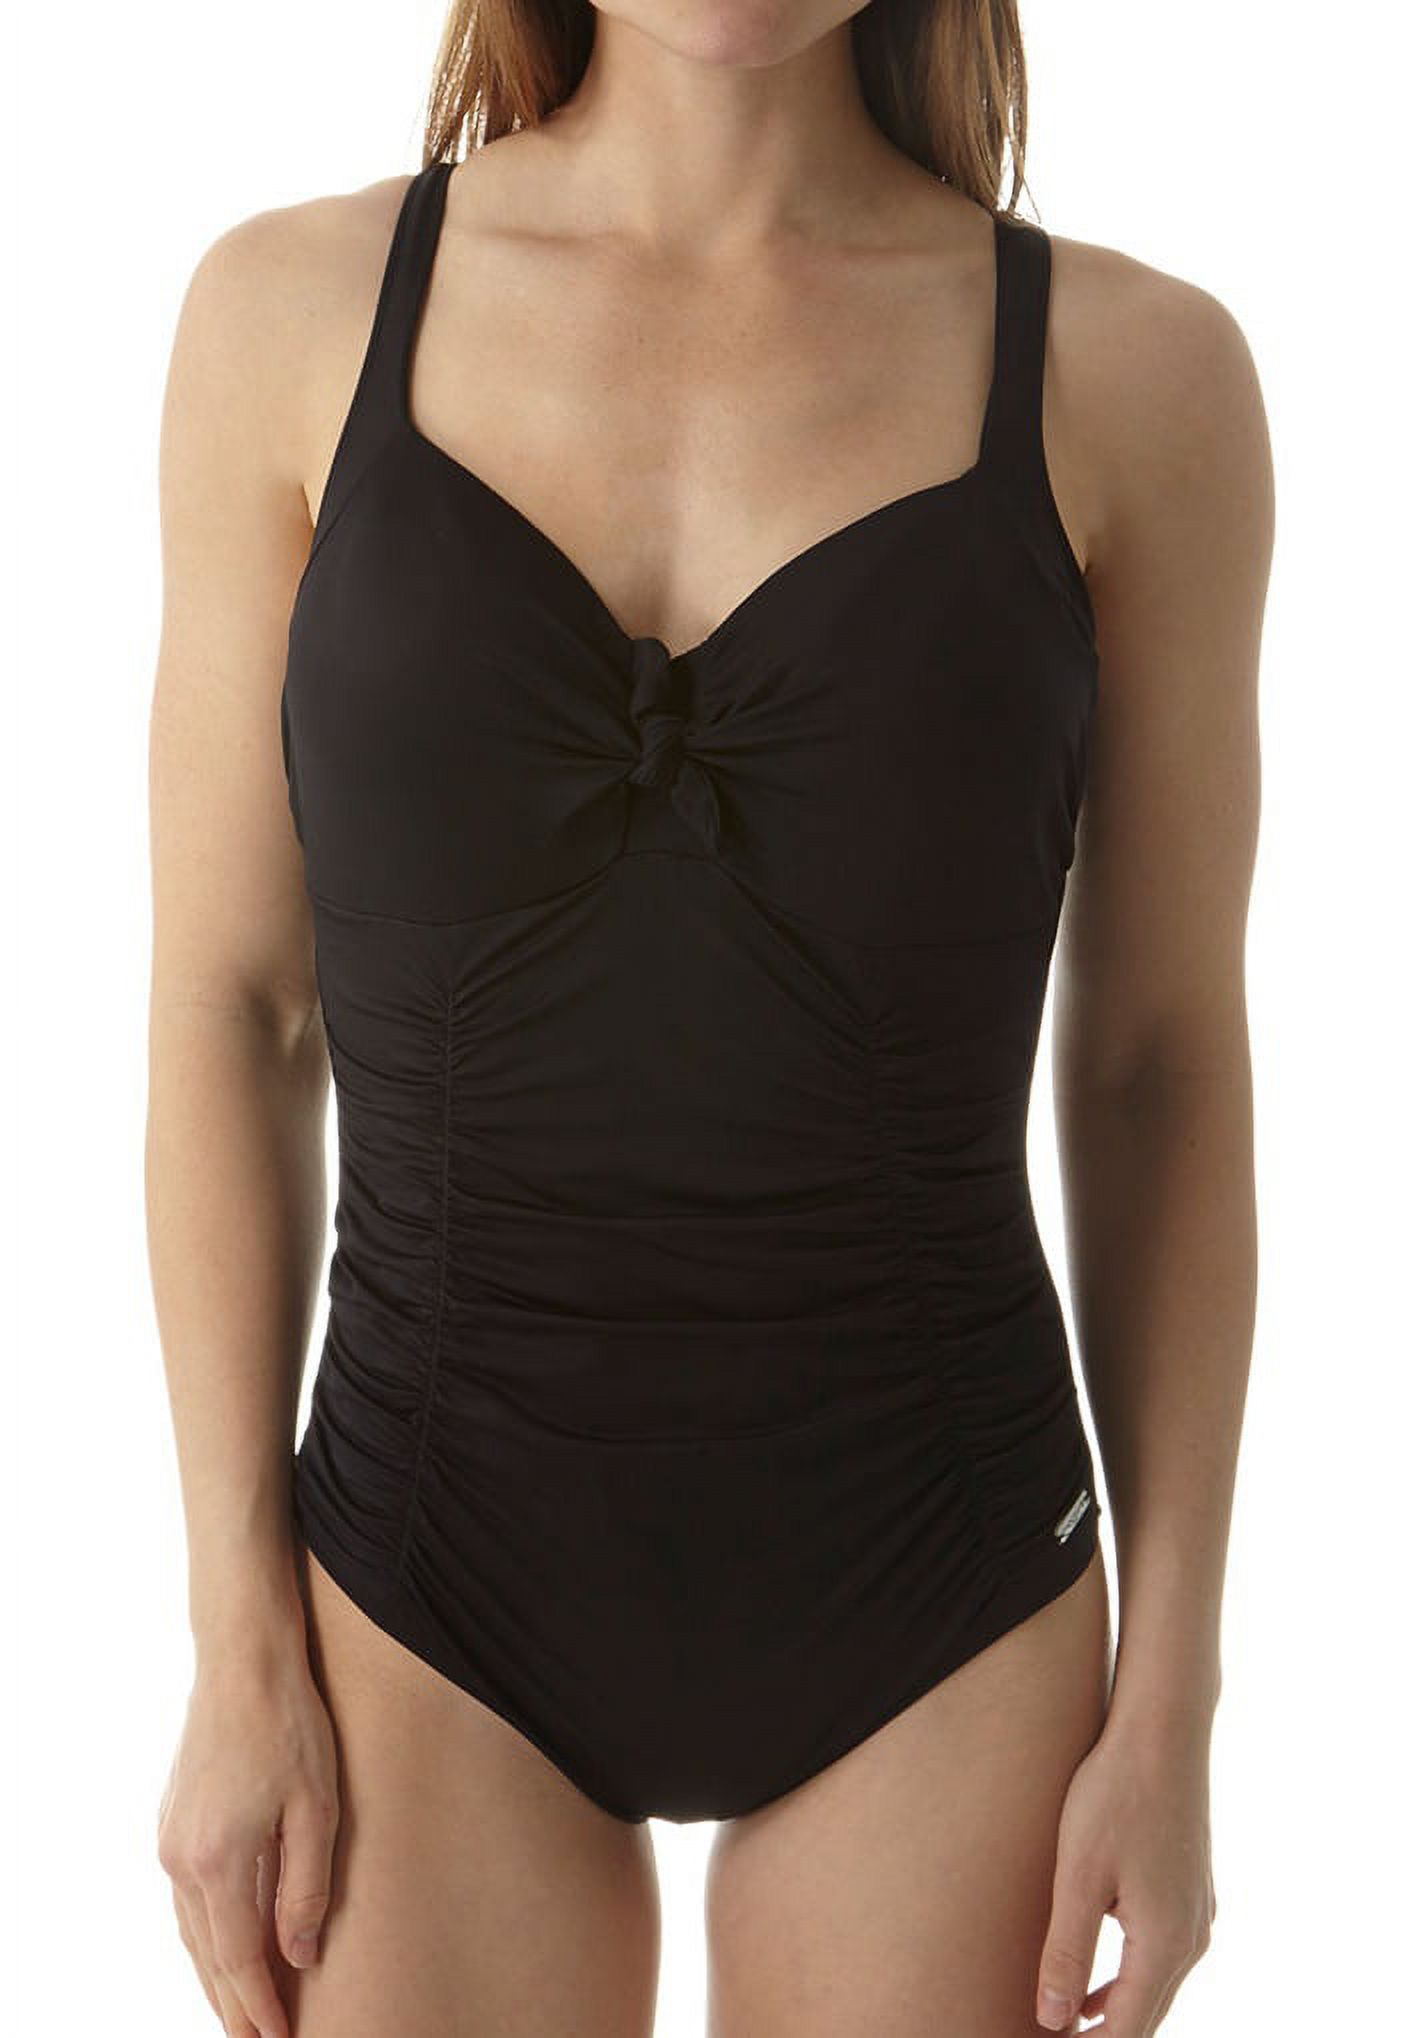 Fantasie Los Cabos Swimsuit - image 3 of 4